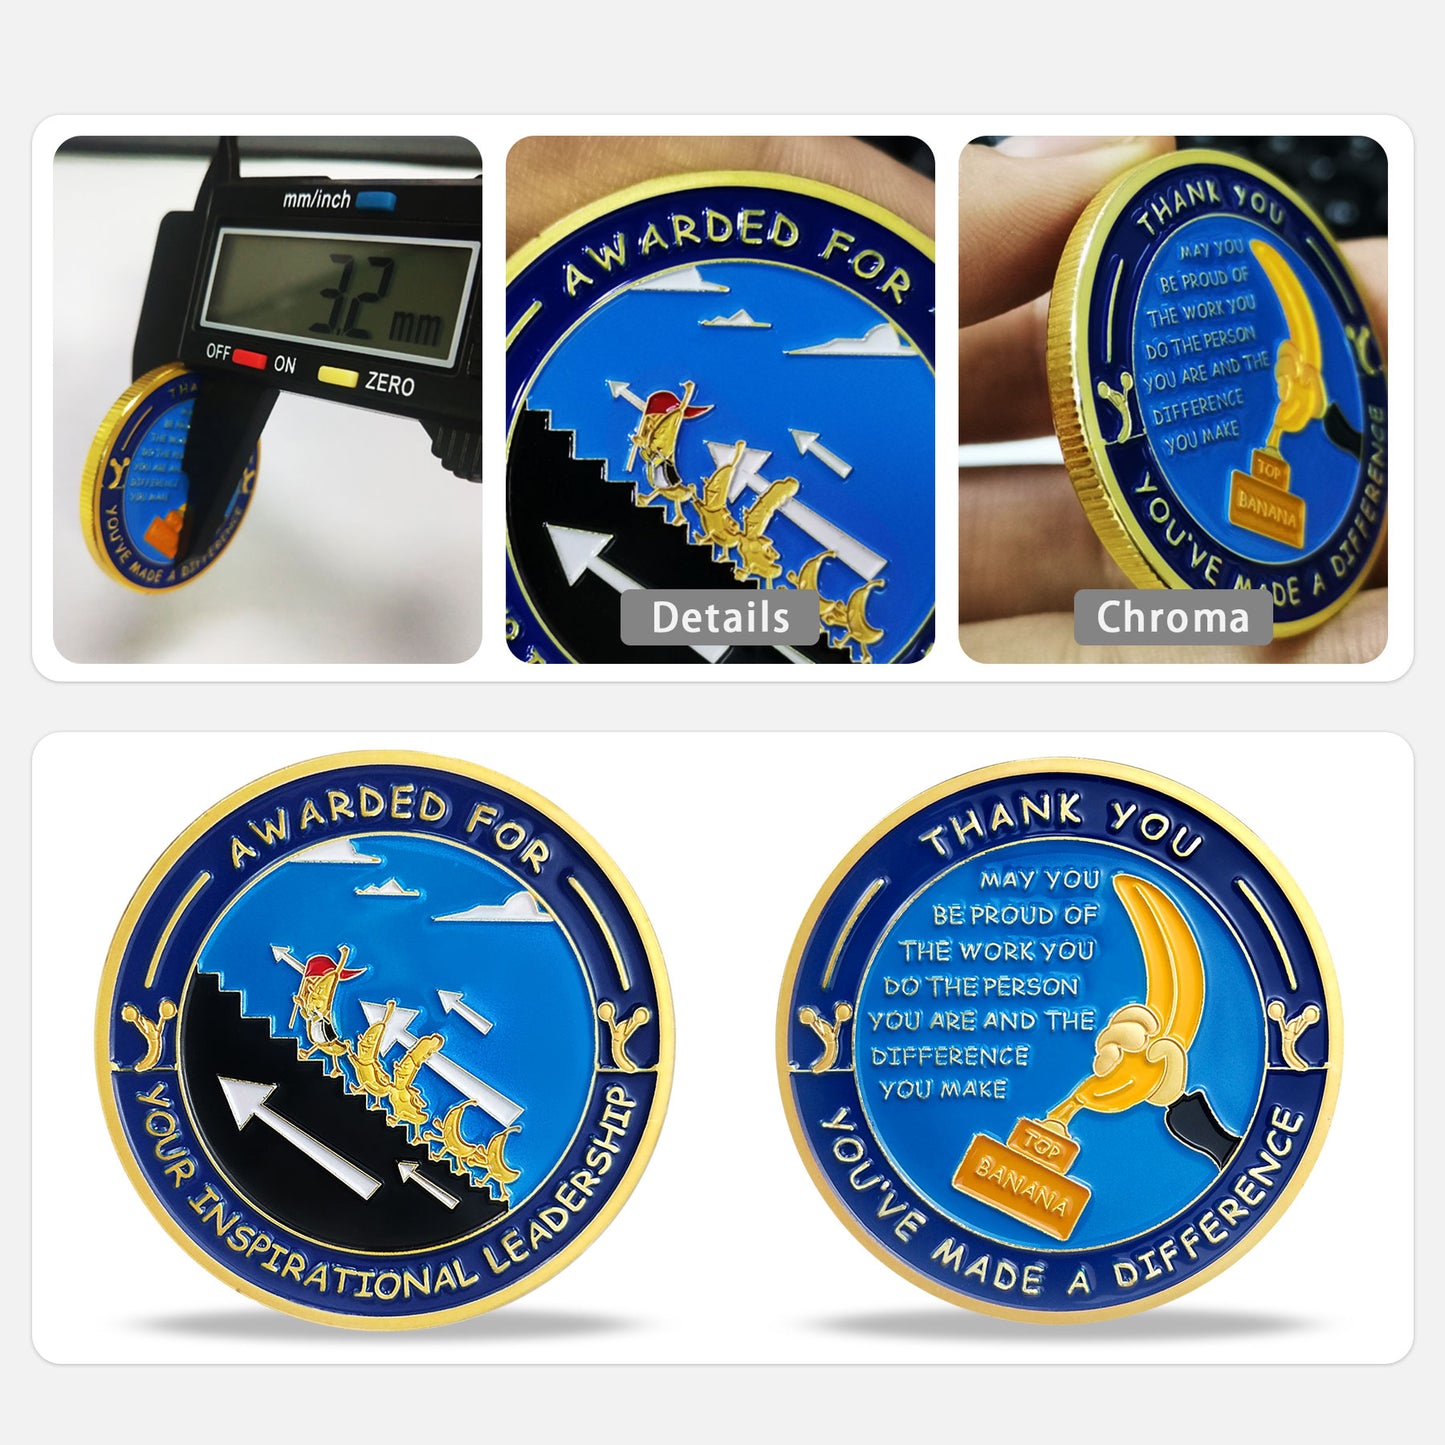 Encouragement Challenge Coin-Employee Appreciation Gifts Inspirational Thank You Coin for Students and Cowokers-Climb Stairs